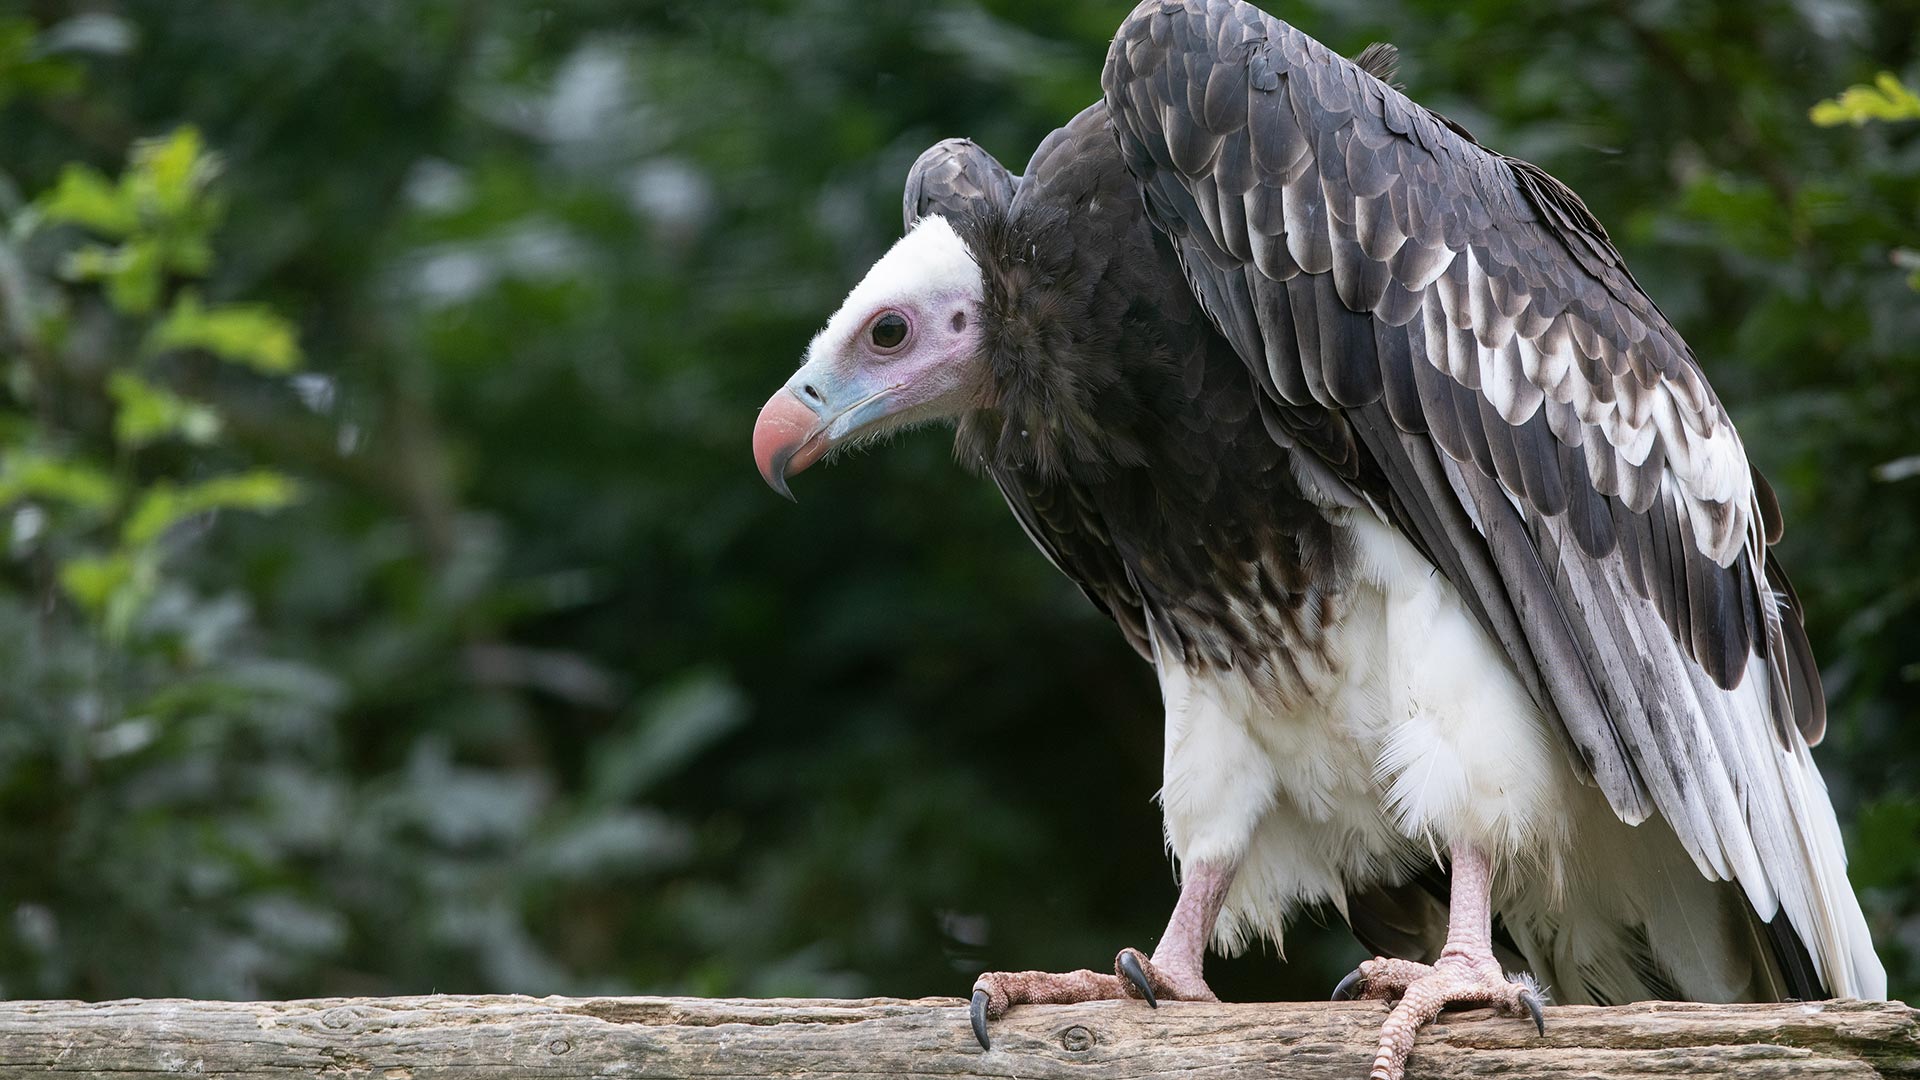 White-headed vulture perched on a wooden log and leaned over.